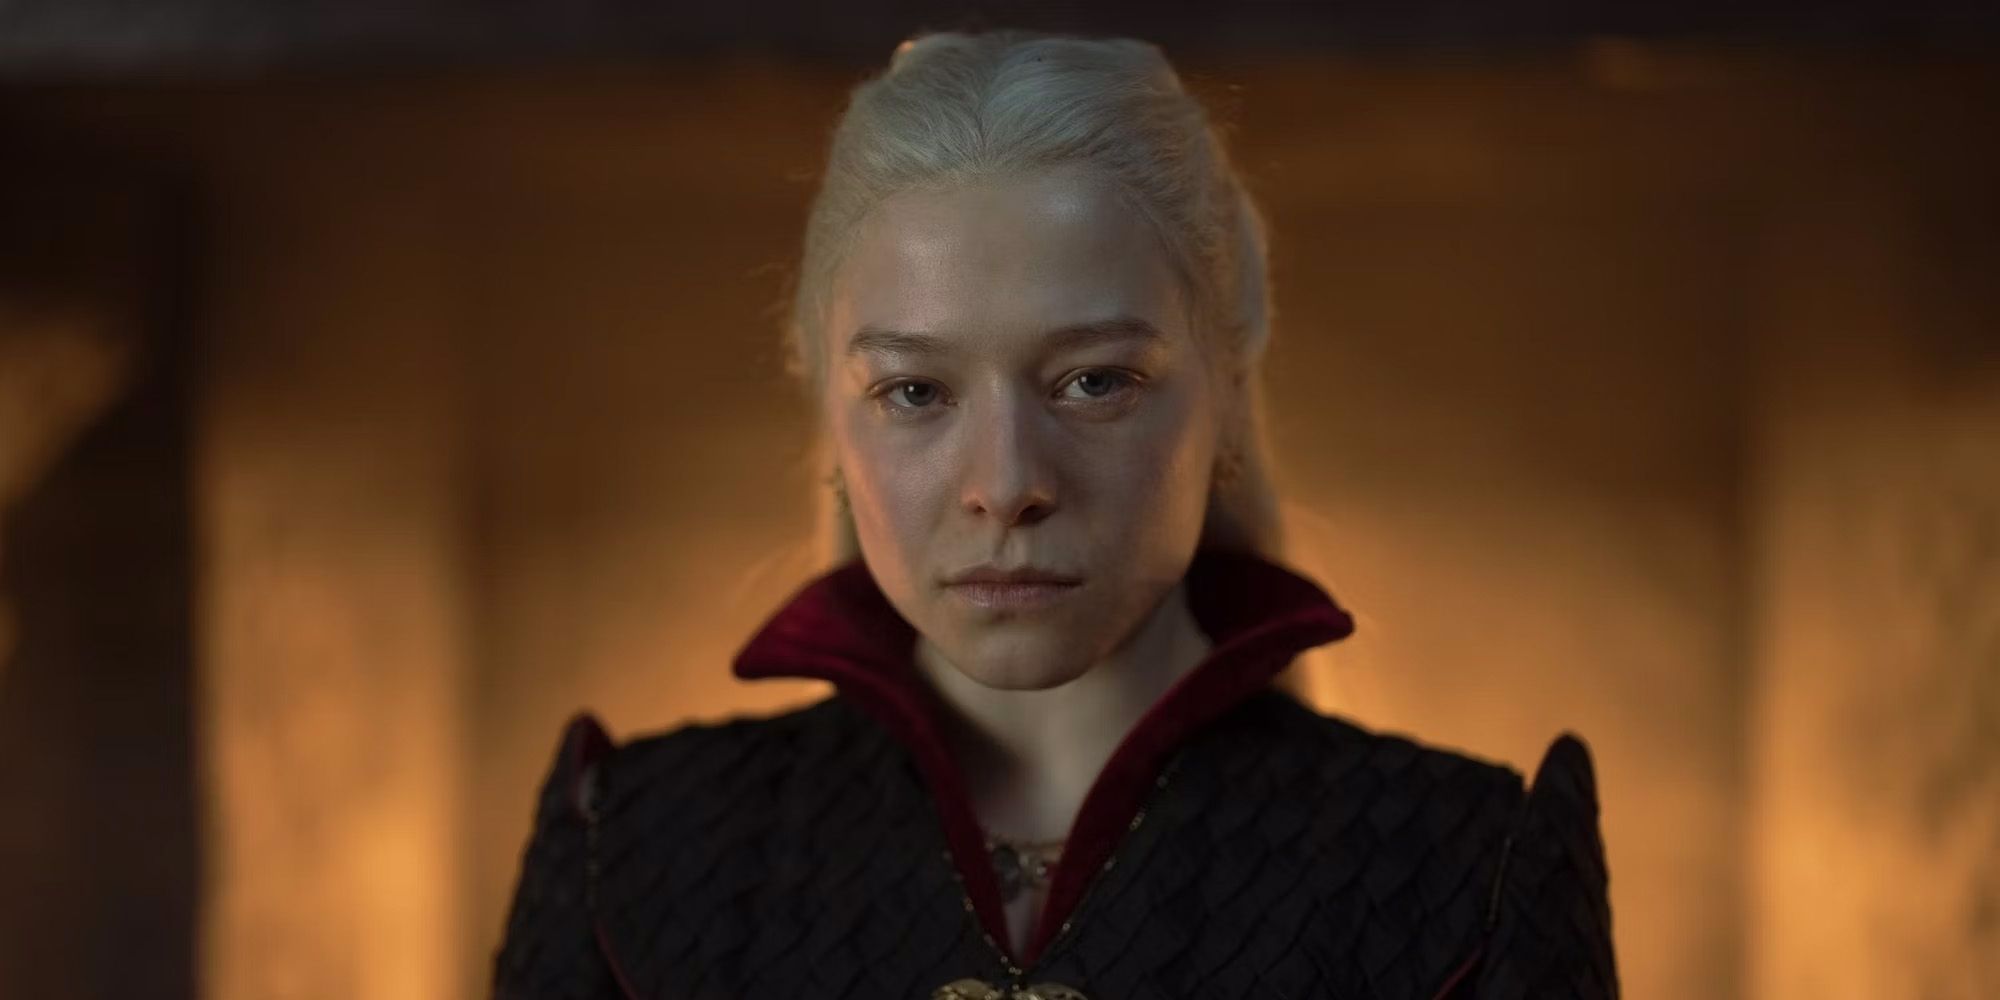 Emma Darcy as an angry Rhaenyra Targaryen in the Season 1 finale of House of the Dragon